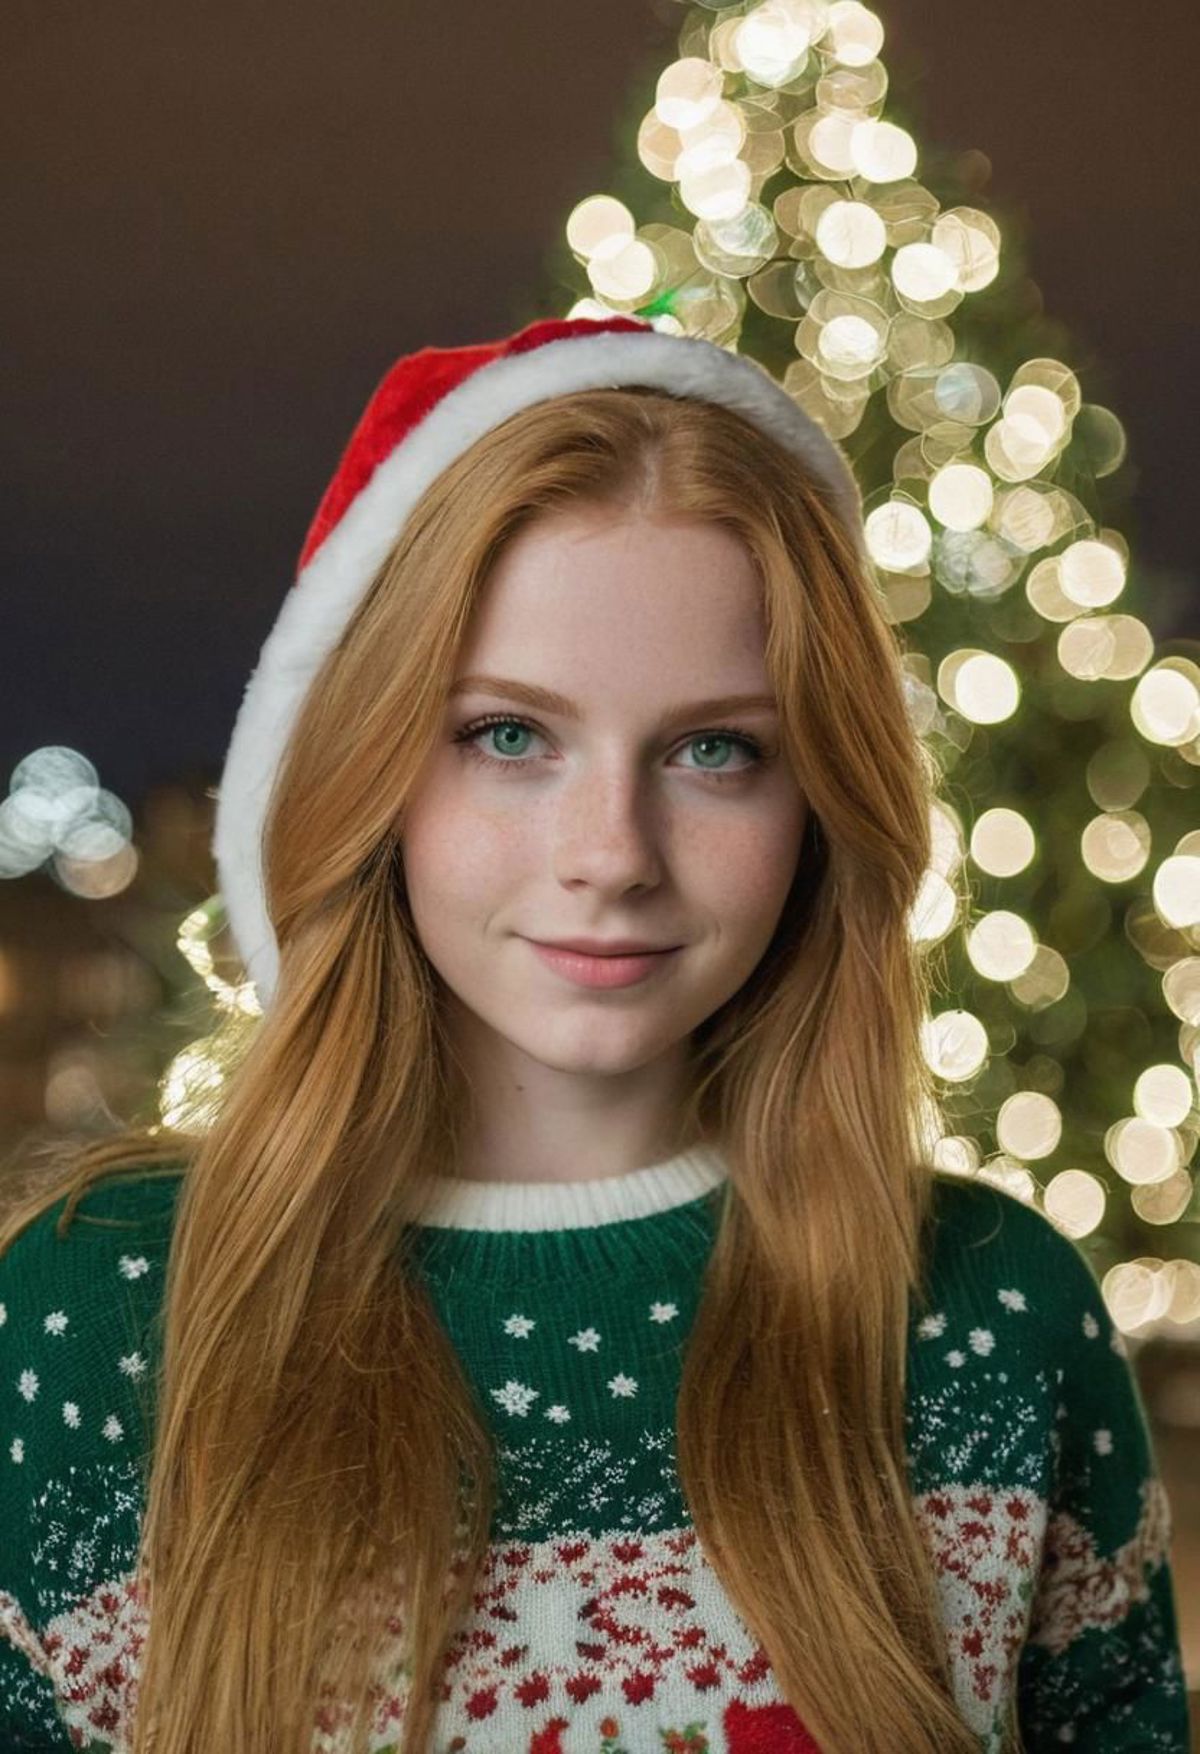 A young woman wearing a green sweater and a Santa hat.